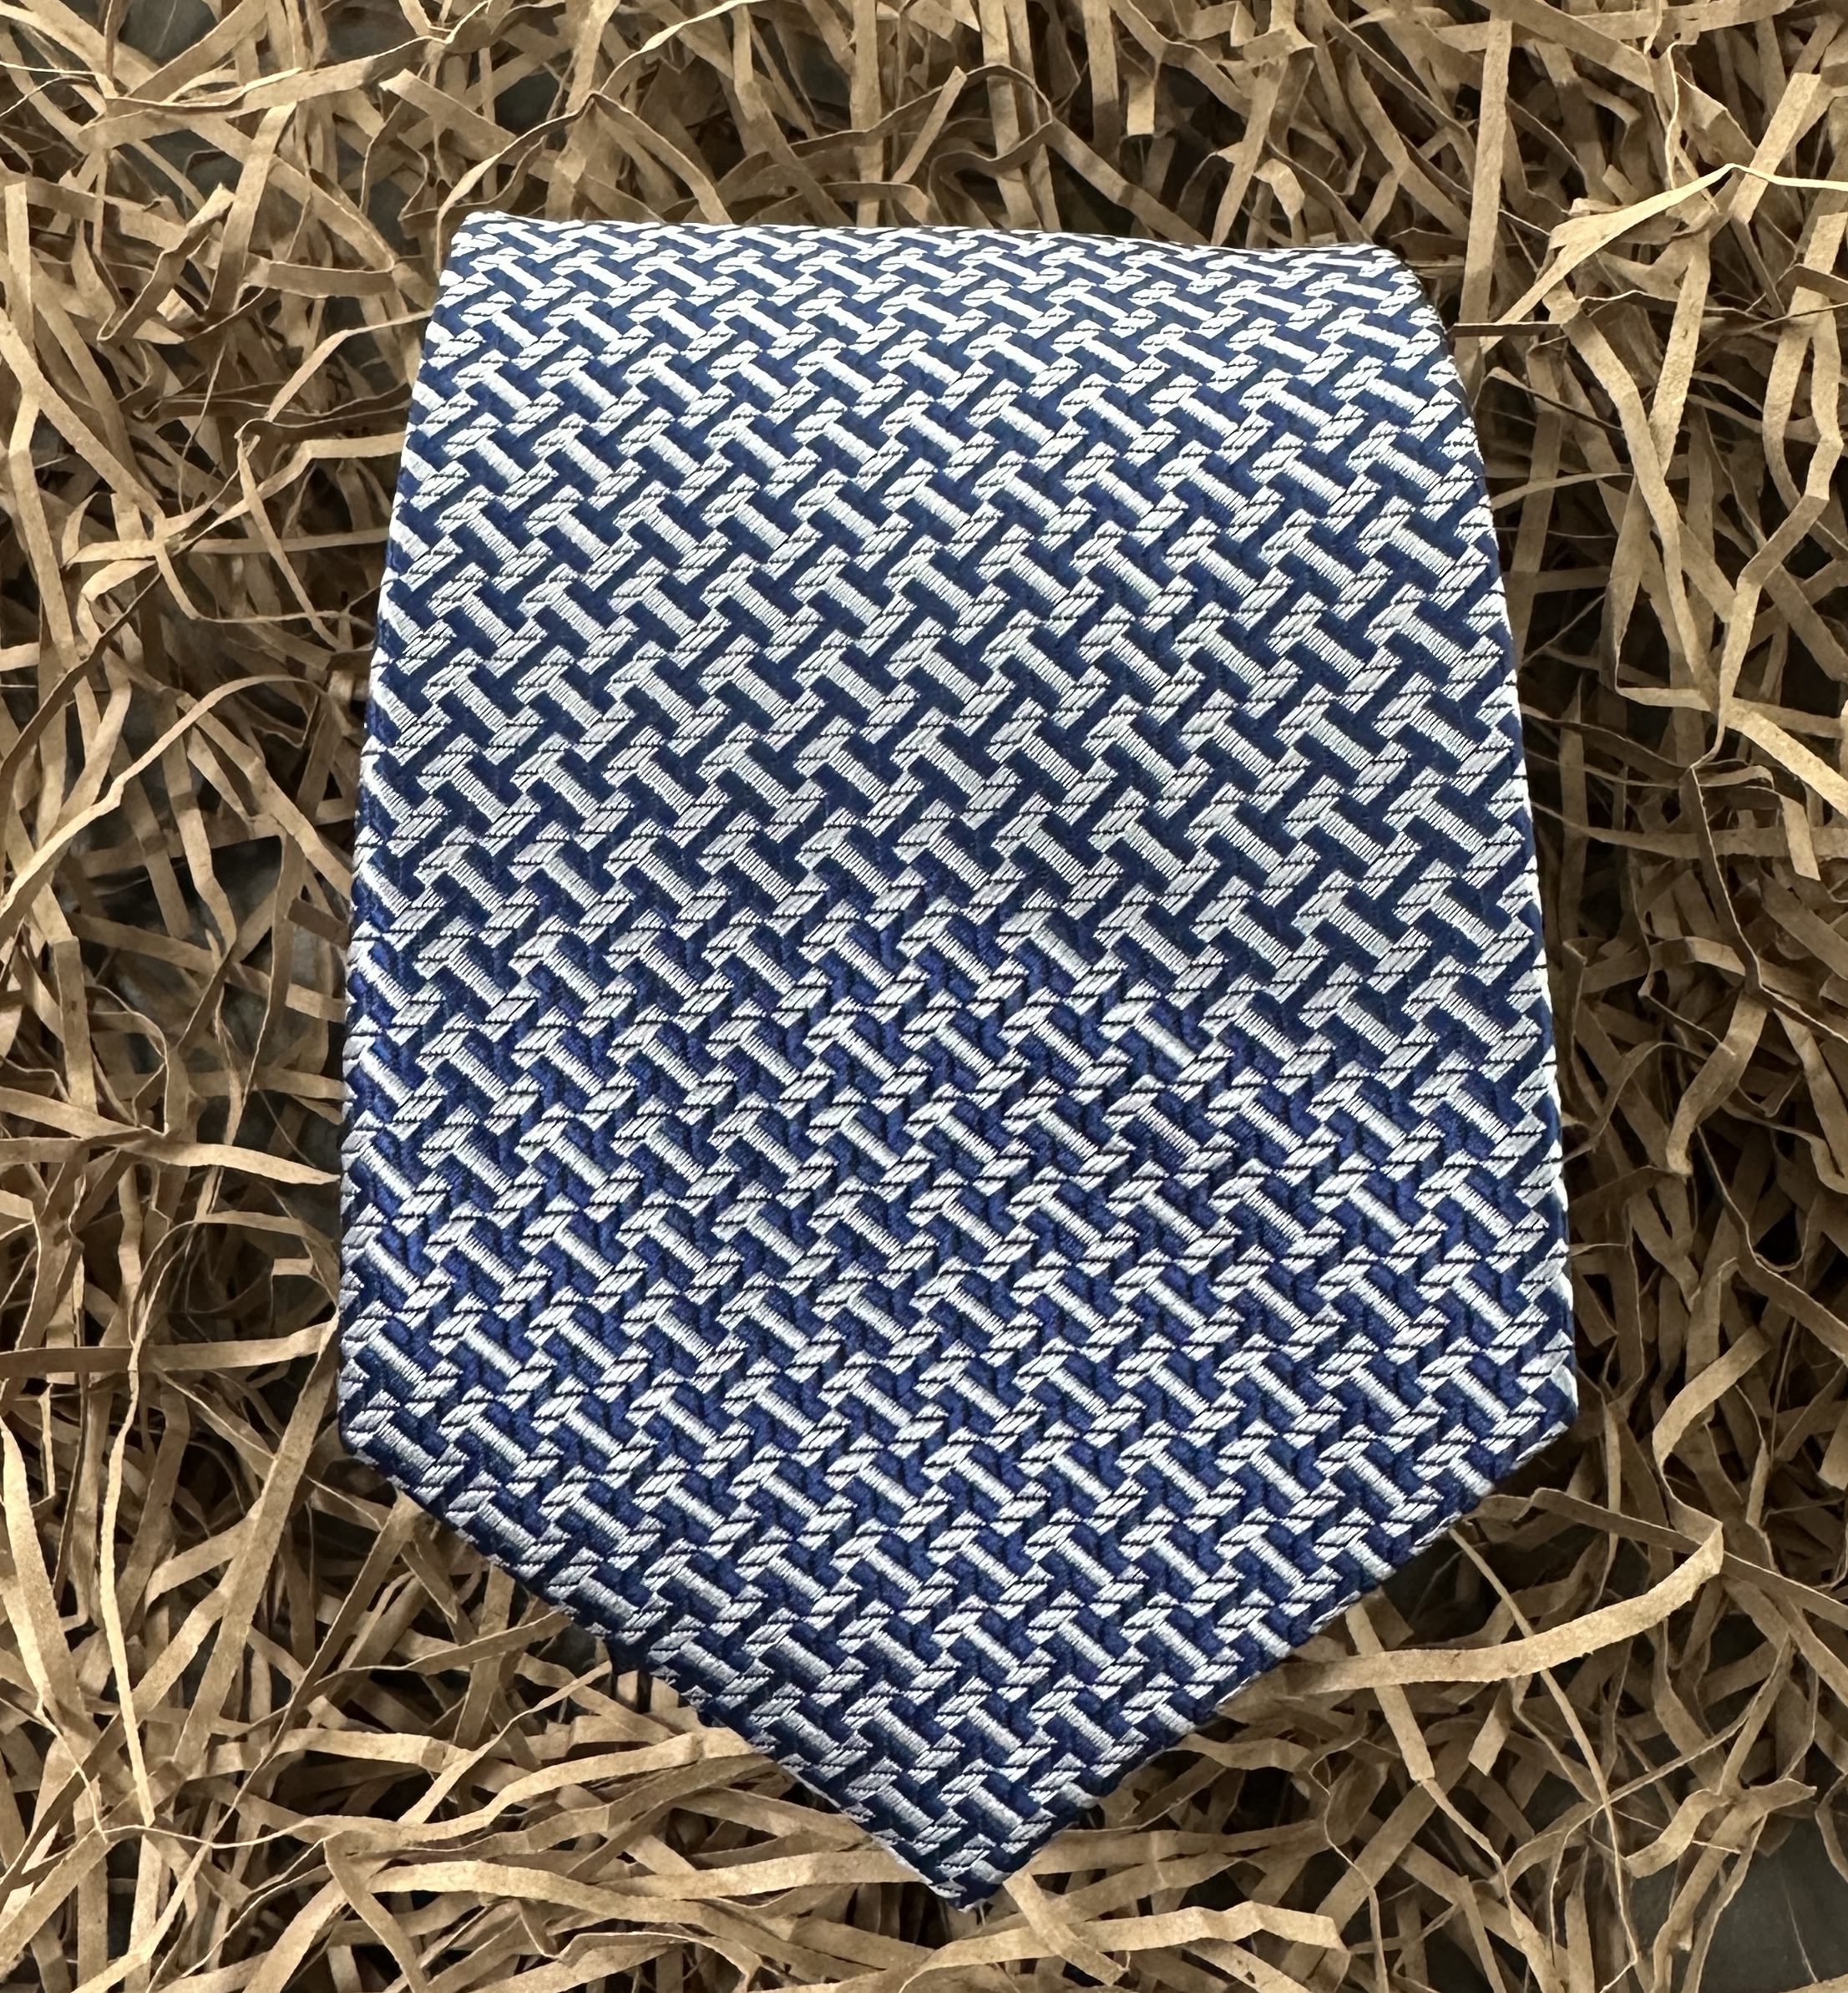 A blue and silver men's wide tie for formal occasions.